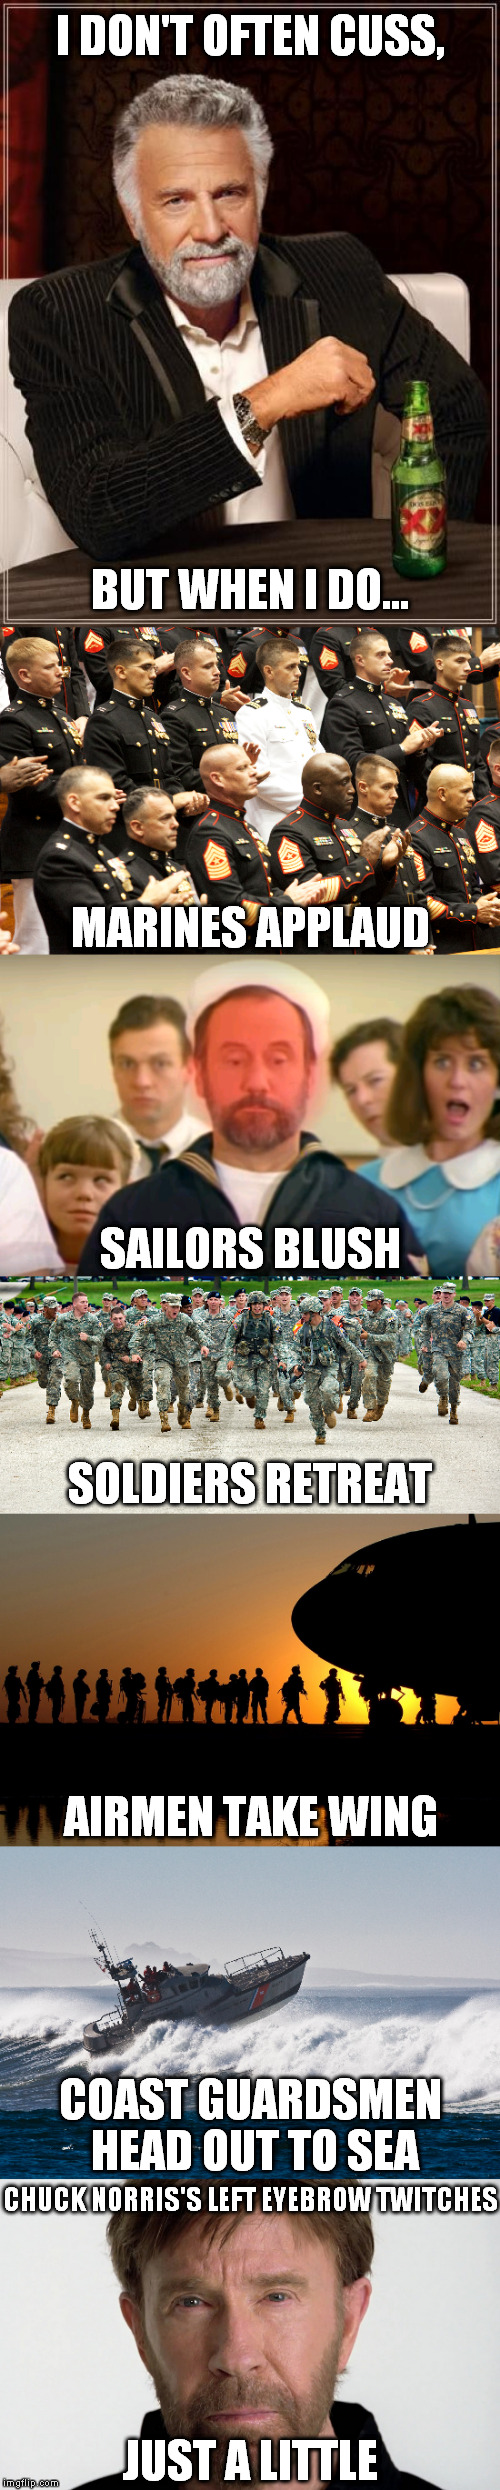 I DON'T OFTEN CUSS, BUT WHEN I DO... | I DON'T OFTEN CUSS, BUT WHEN I DO... MARINES APPLAUD; SAILORS BLUSH; SOLDIERS RETREAT; AIRMEN TAKE WING; COAST GUARDSMEN HEAD OUT TO SEA; CHUCK NORRIS'S LEFT EYEBROW TWITCHES; JUST A LITTLE | image tagged in marines,army,navy,air force,chuck norris,coast guard | made w/ Imgflip meme maker